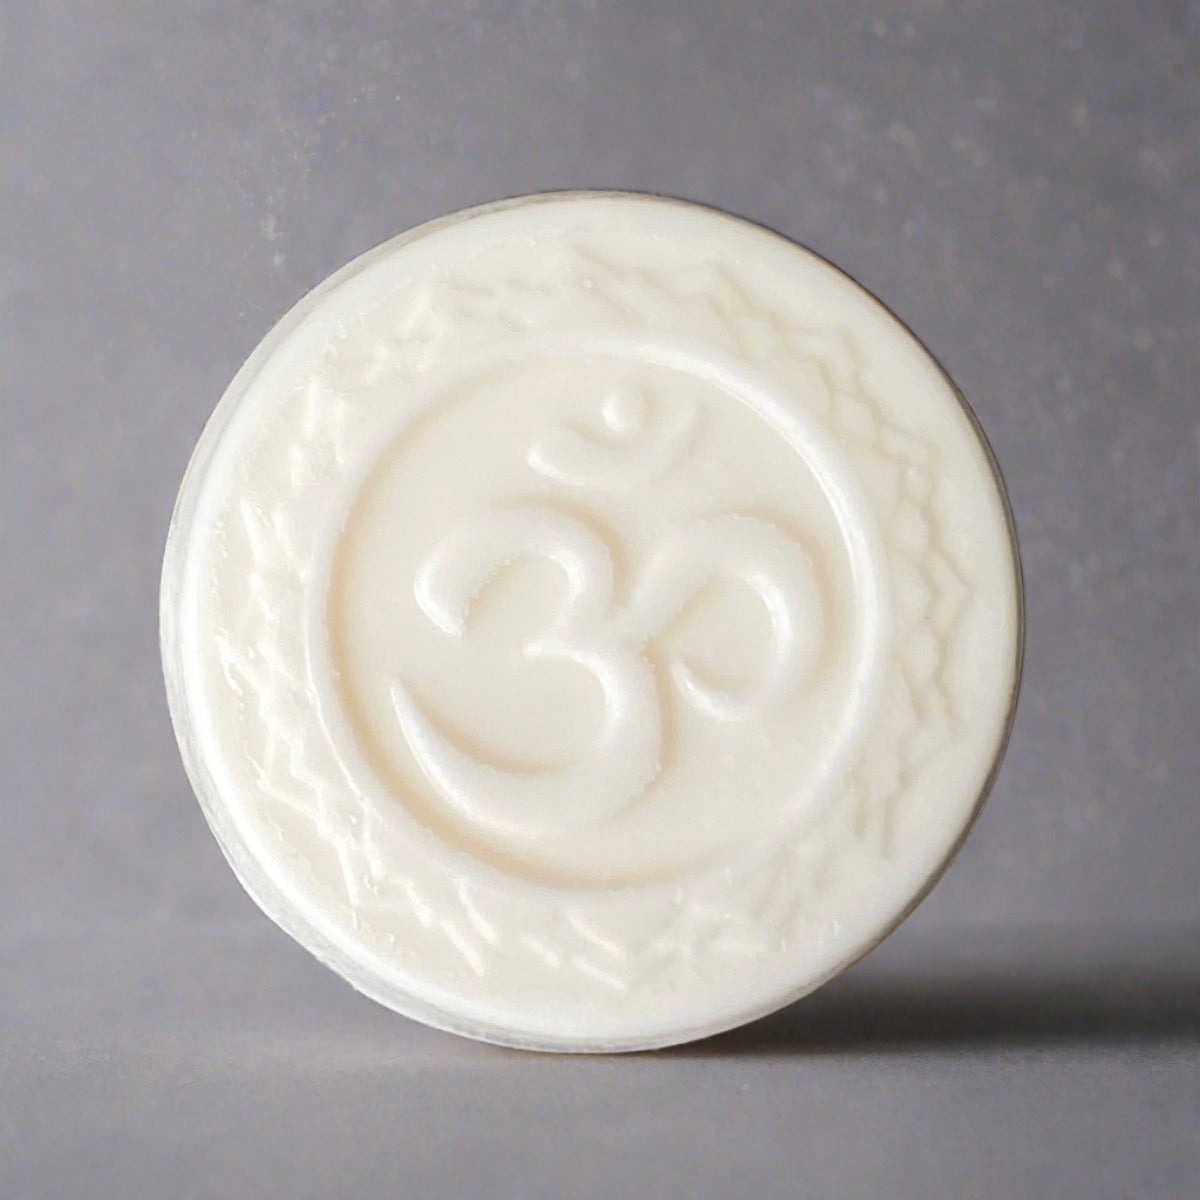 Mind soothing Om Patchouli & Shea butter in Om soap mold Soap